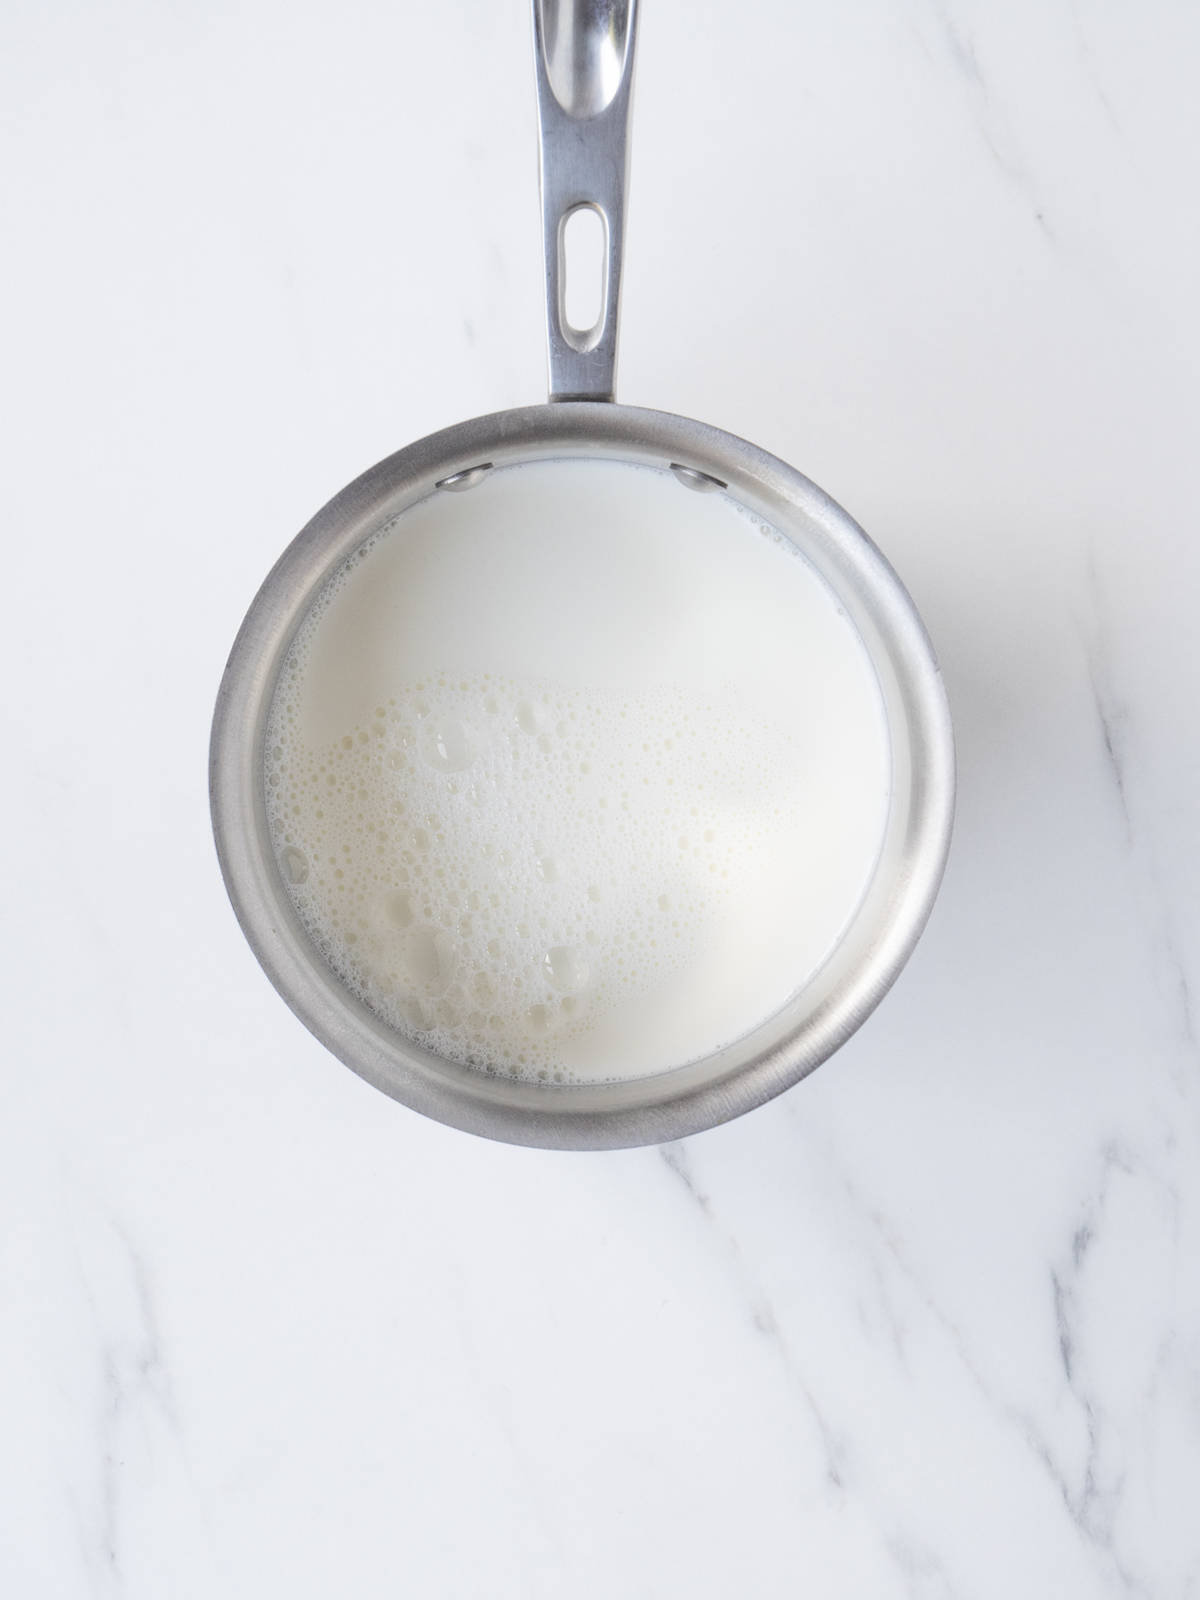 A small saucepan with milk.